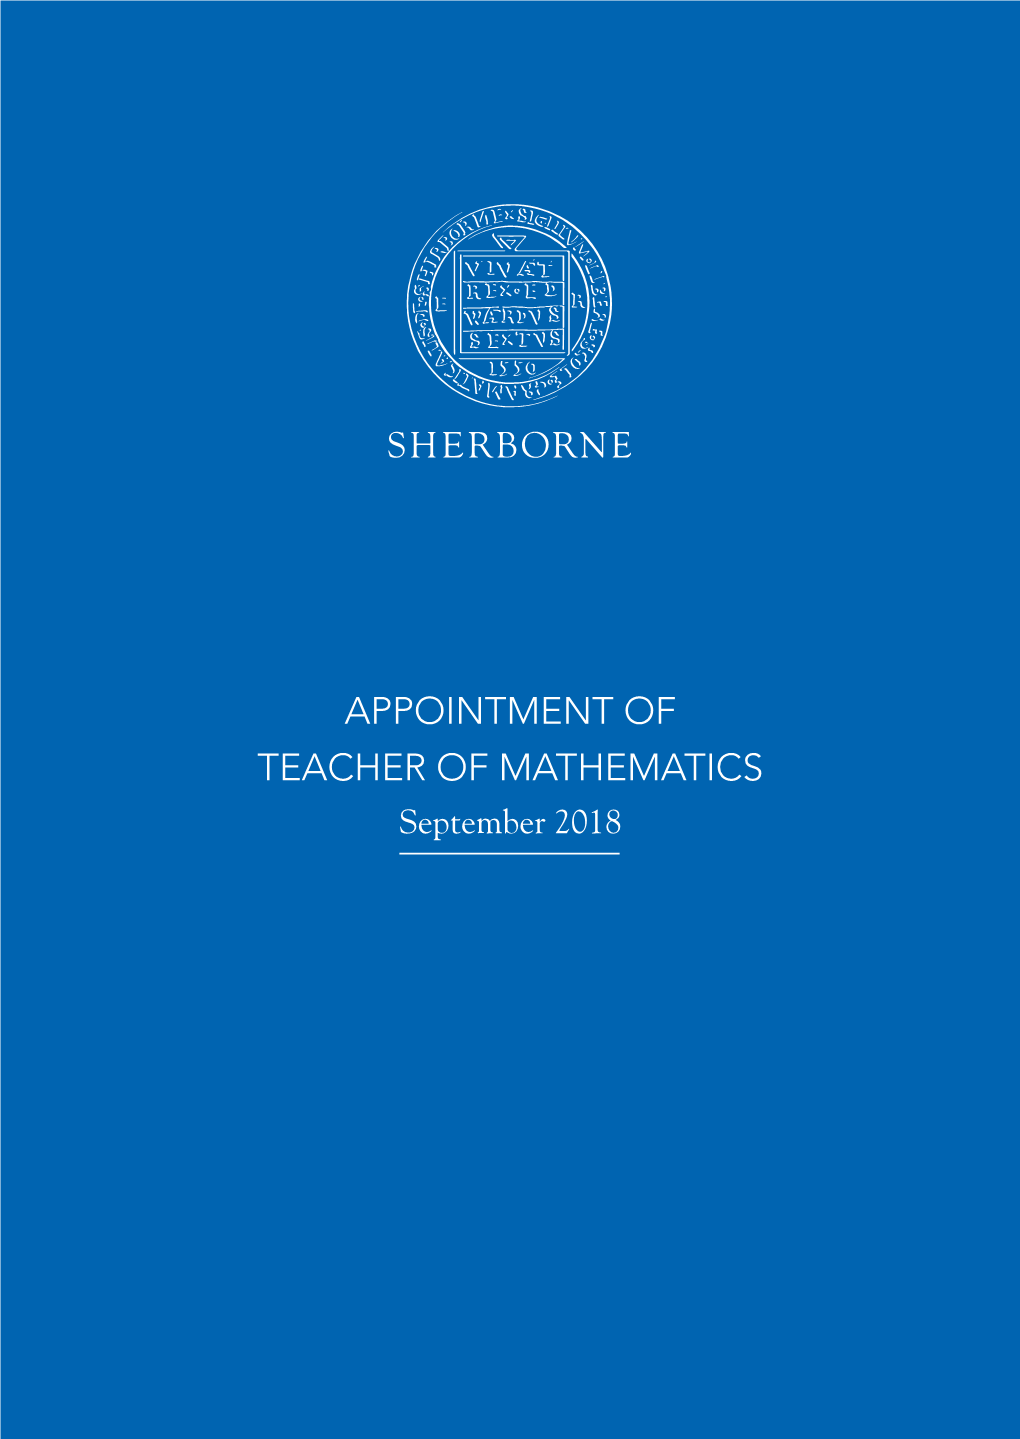 APPOINTMENT of TEACHER of MATHEMATICS September 2018 an INTRODUCTION to SHERBORNE